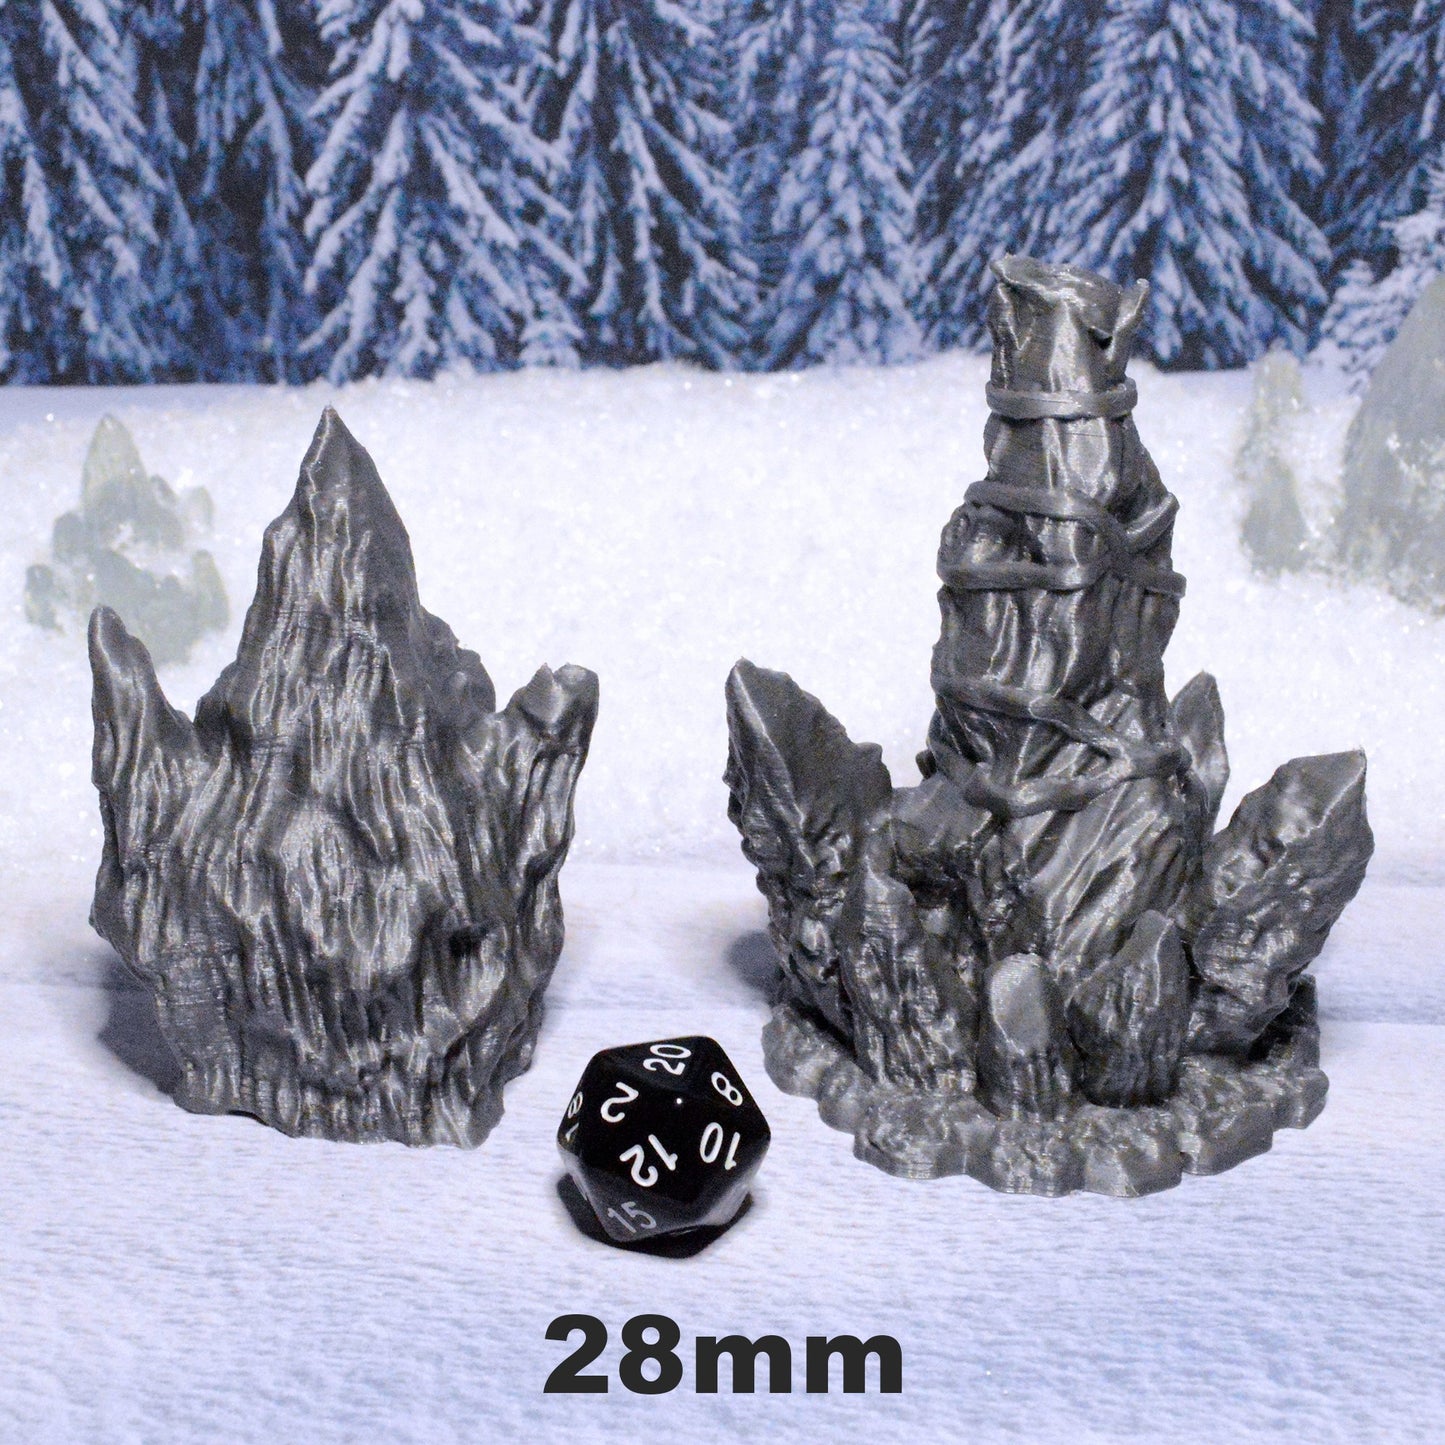 Ice Totems 15mm 28mm 32mm for D&D Icewind Dale Terrain, DnD Pathfinder Arctic Frozen Snowy Icy